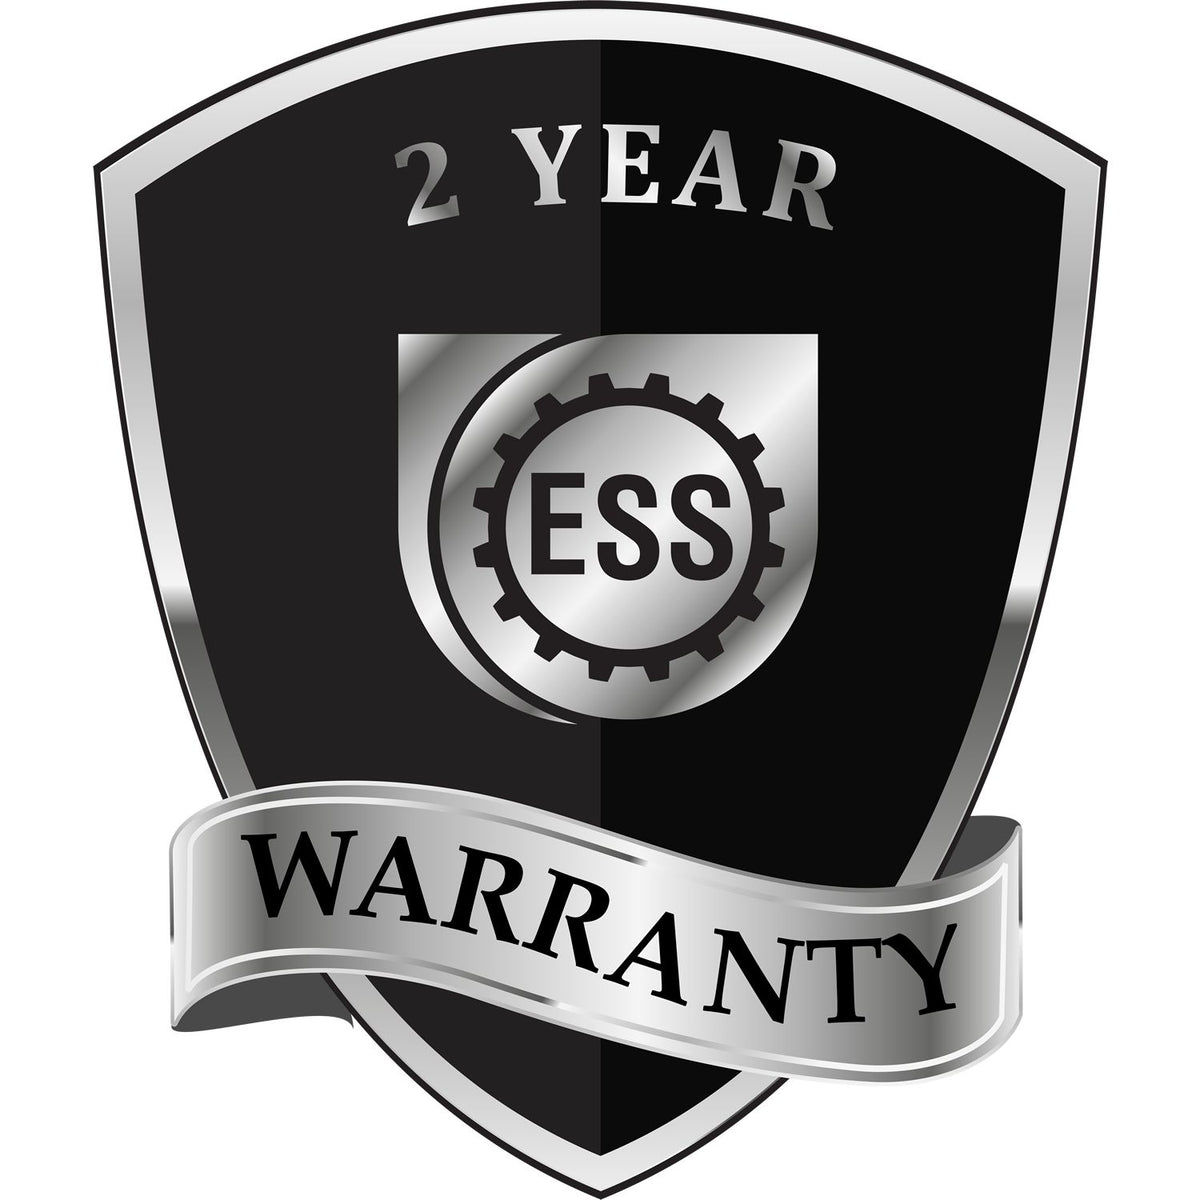 A badge or emblem showing a warranty icon for the Nebraska Desk Architect Embossing Seal